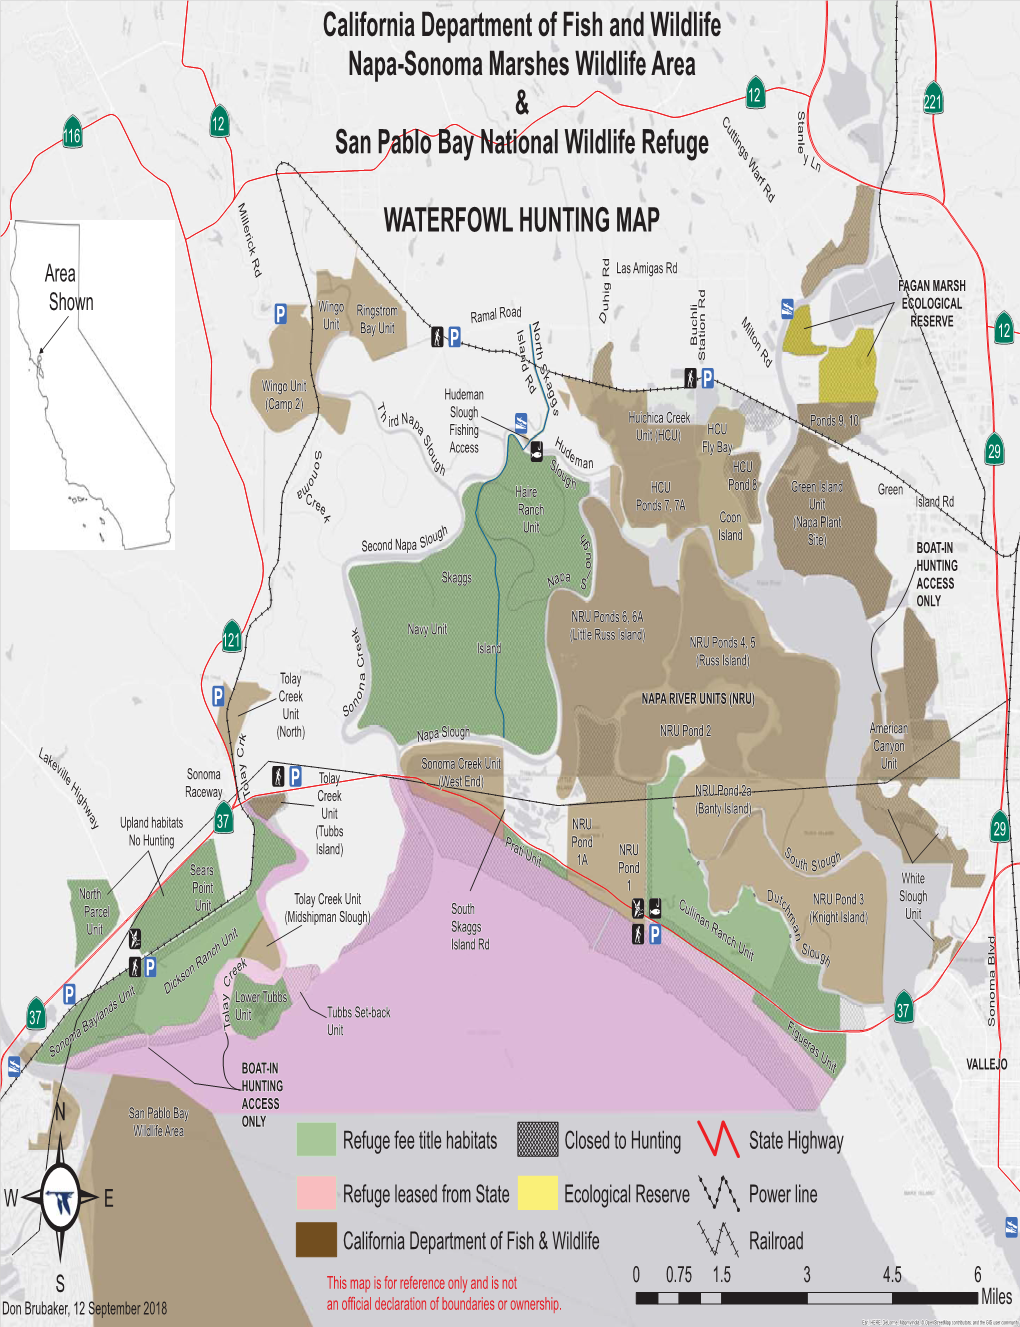 Overview Map of Waterfowl Hunting in the North